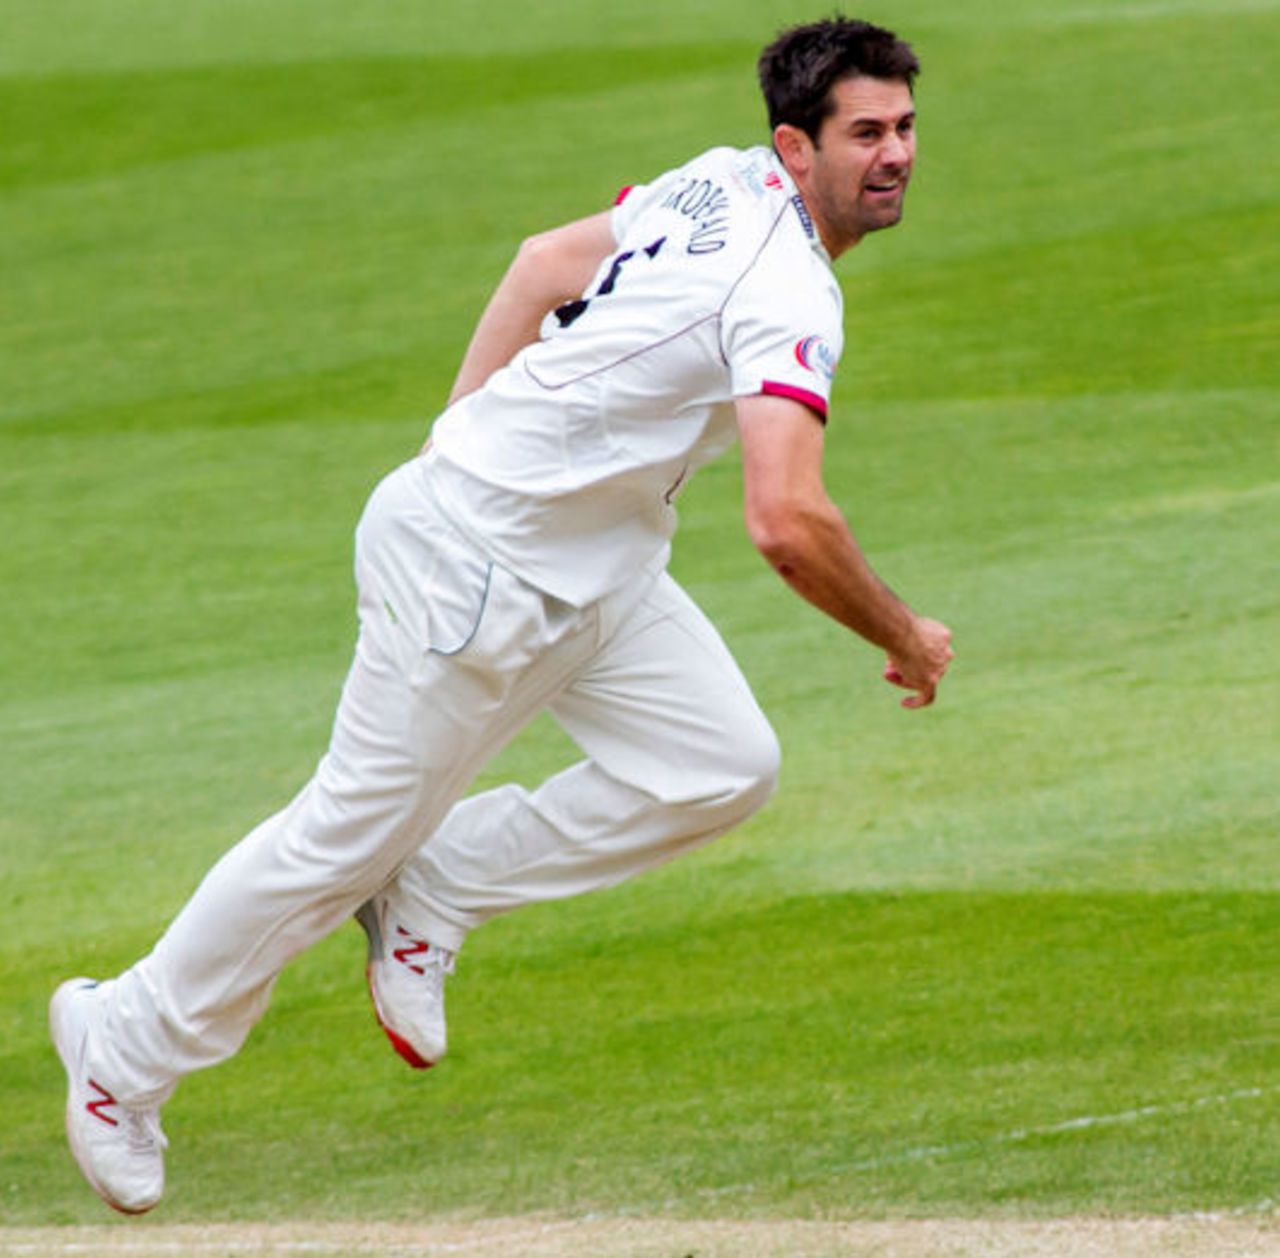 Tim Groenewald bowls for Somerset, Surrey v Somerset, Specsavers Championship Division One, Kia Oval, April 26, 2016